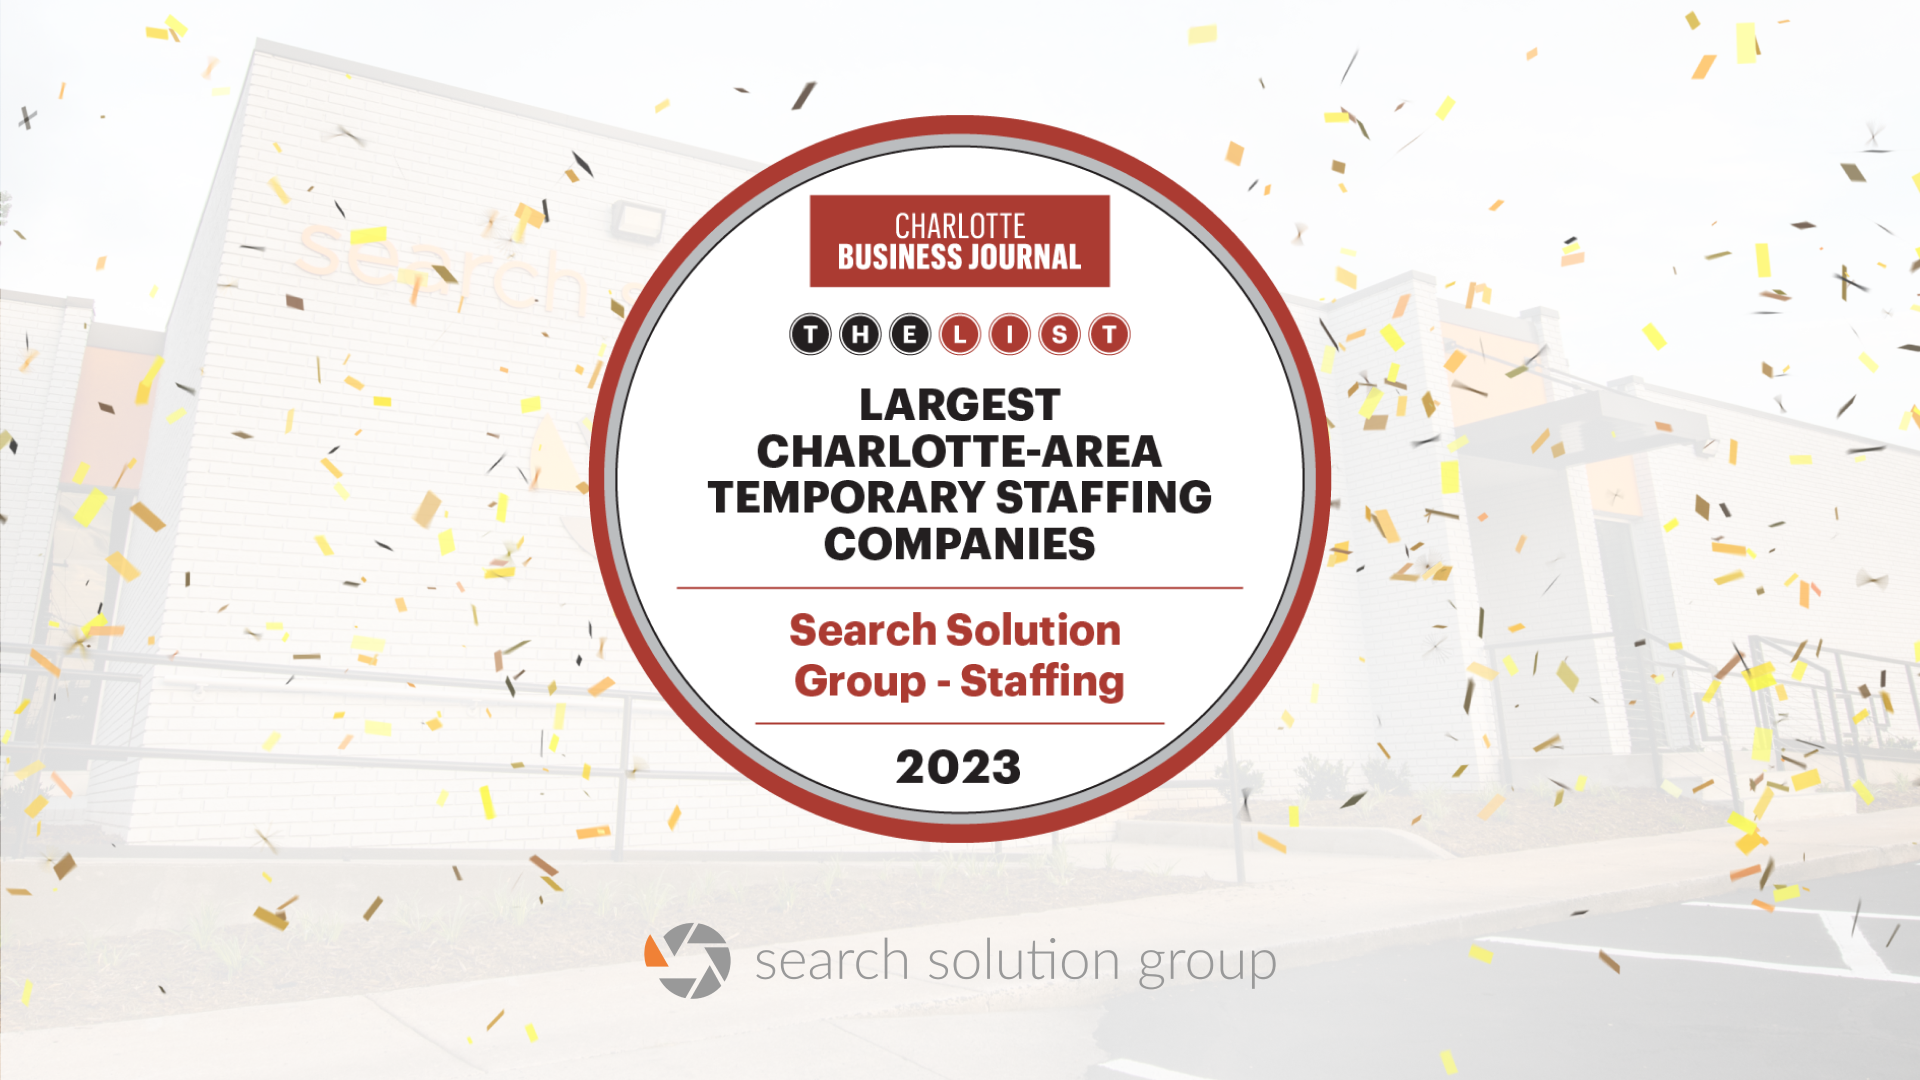 CBJ Top 25 Staffing Companies – SSG Wins 4th Year in a Row